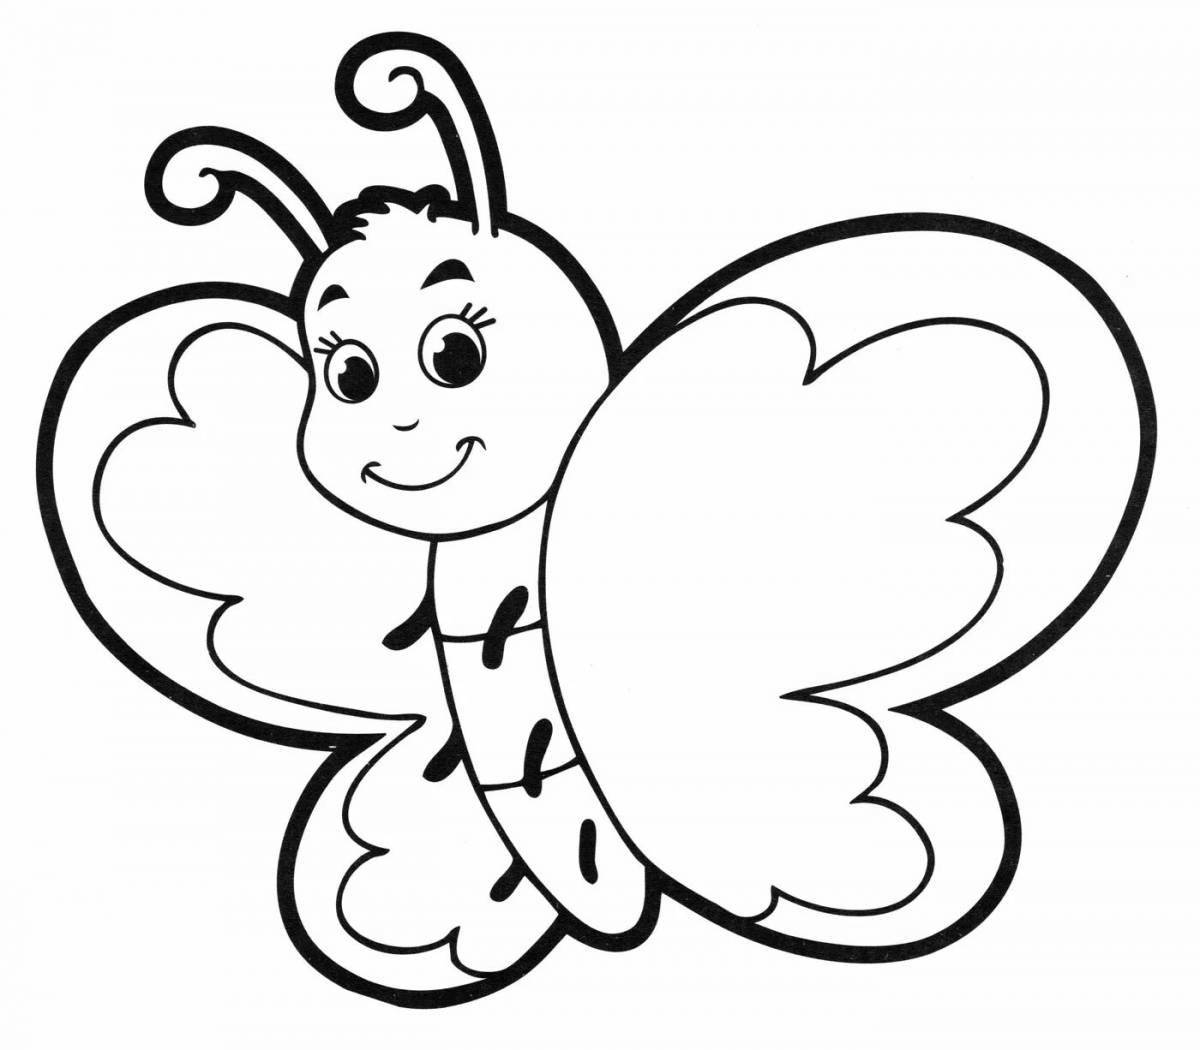 Cute butterfly coloring book for kids